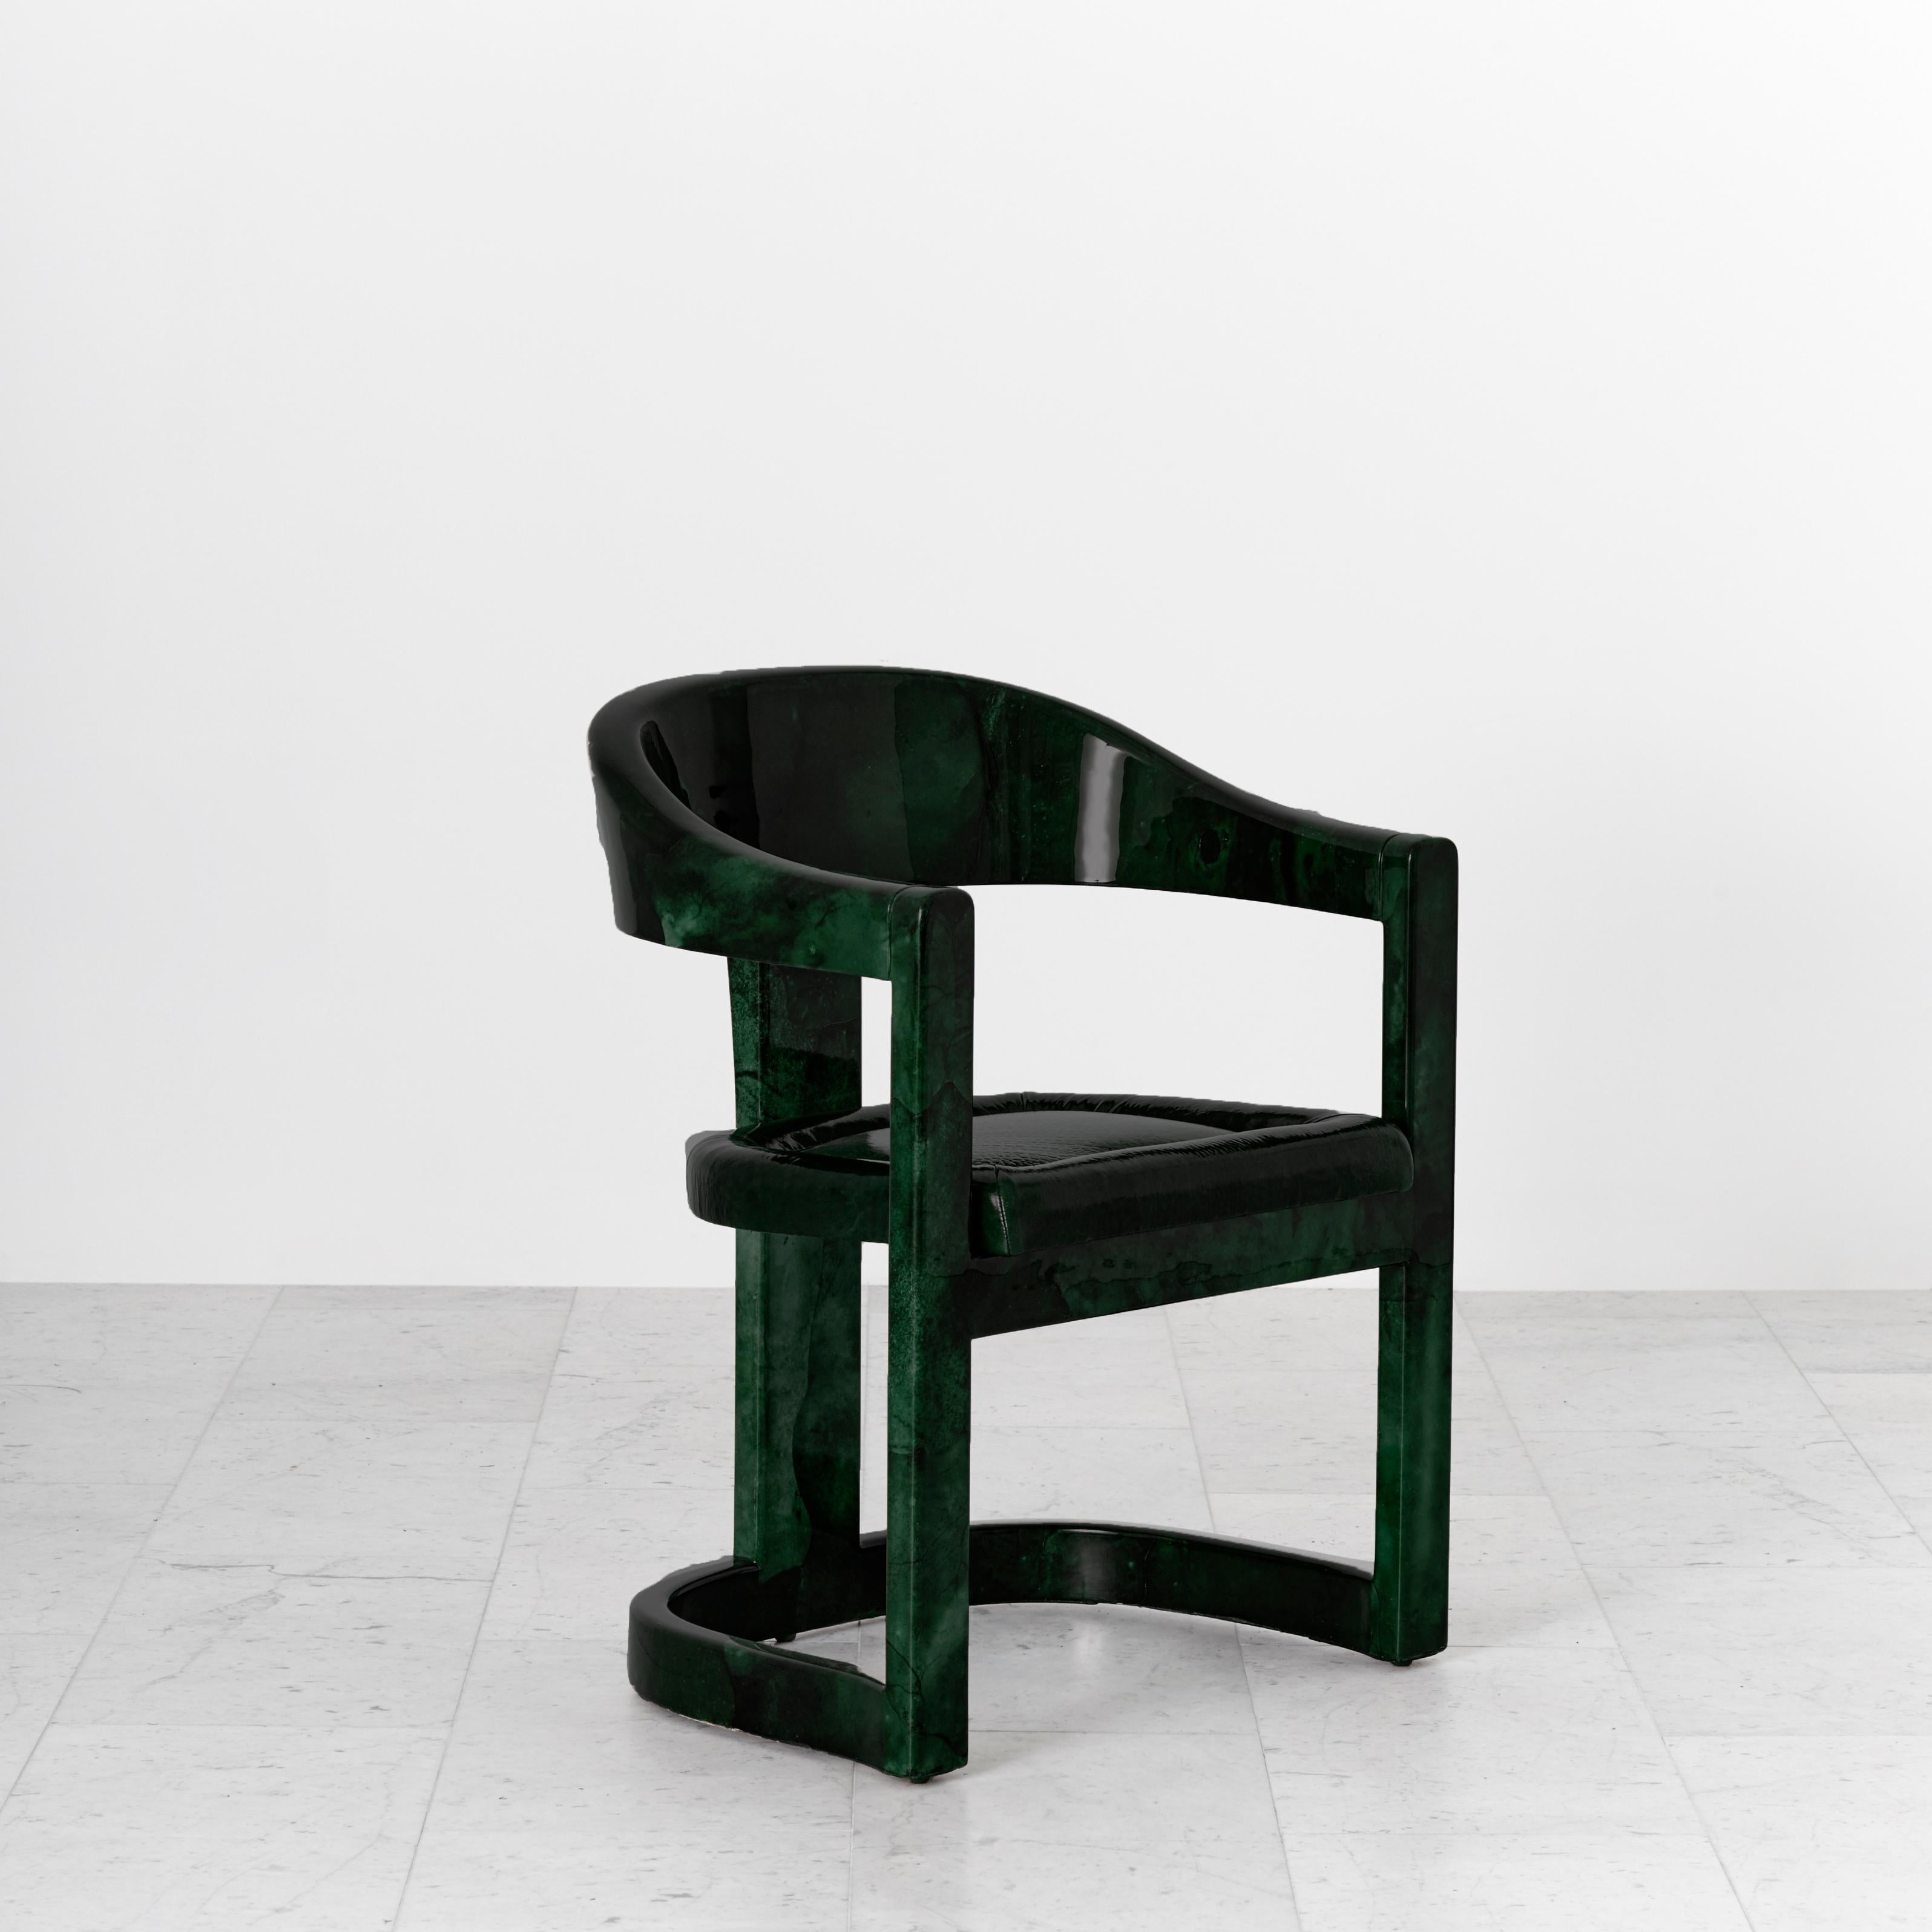 An iconic form by Karl Springer, the Onassis chairs, originally commission by Jacquelyn Kennedy Onassis, feature a barrel back and semi–circular arm rests. The chairs can be commissioned in a variety of woods, finishes, including a range of colored